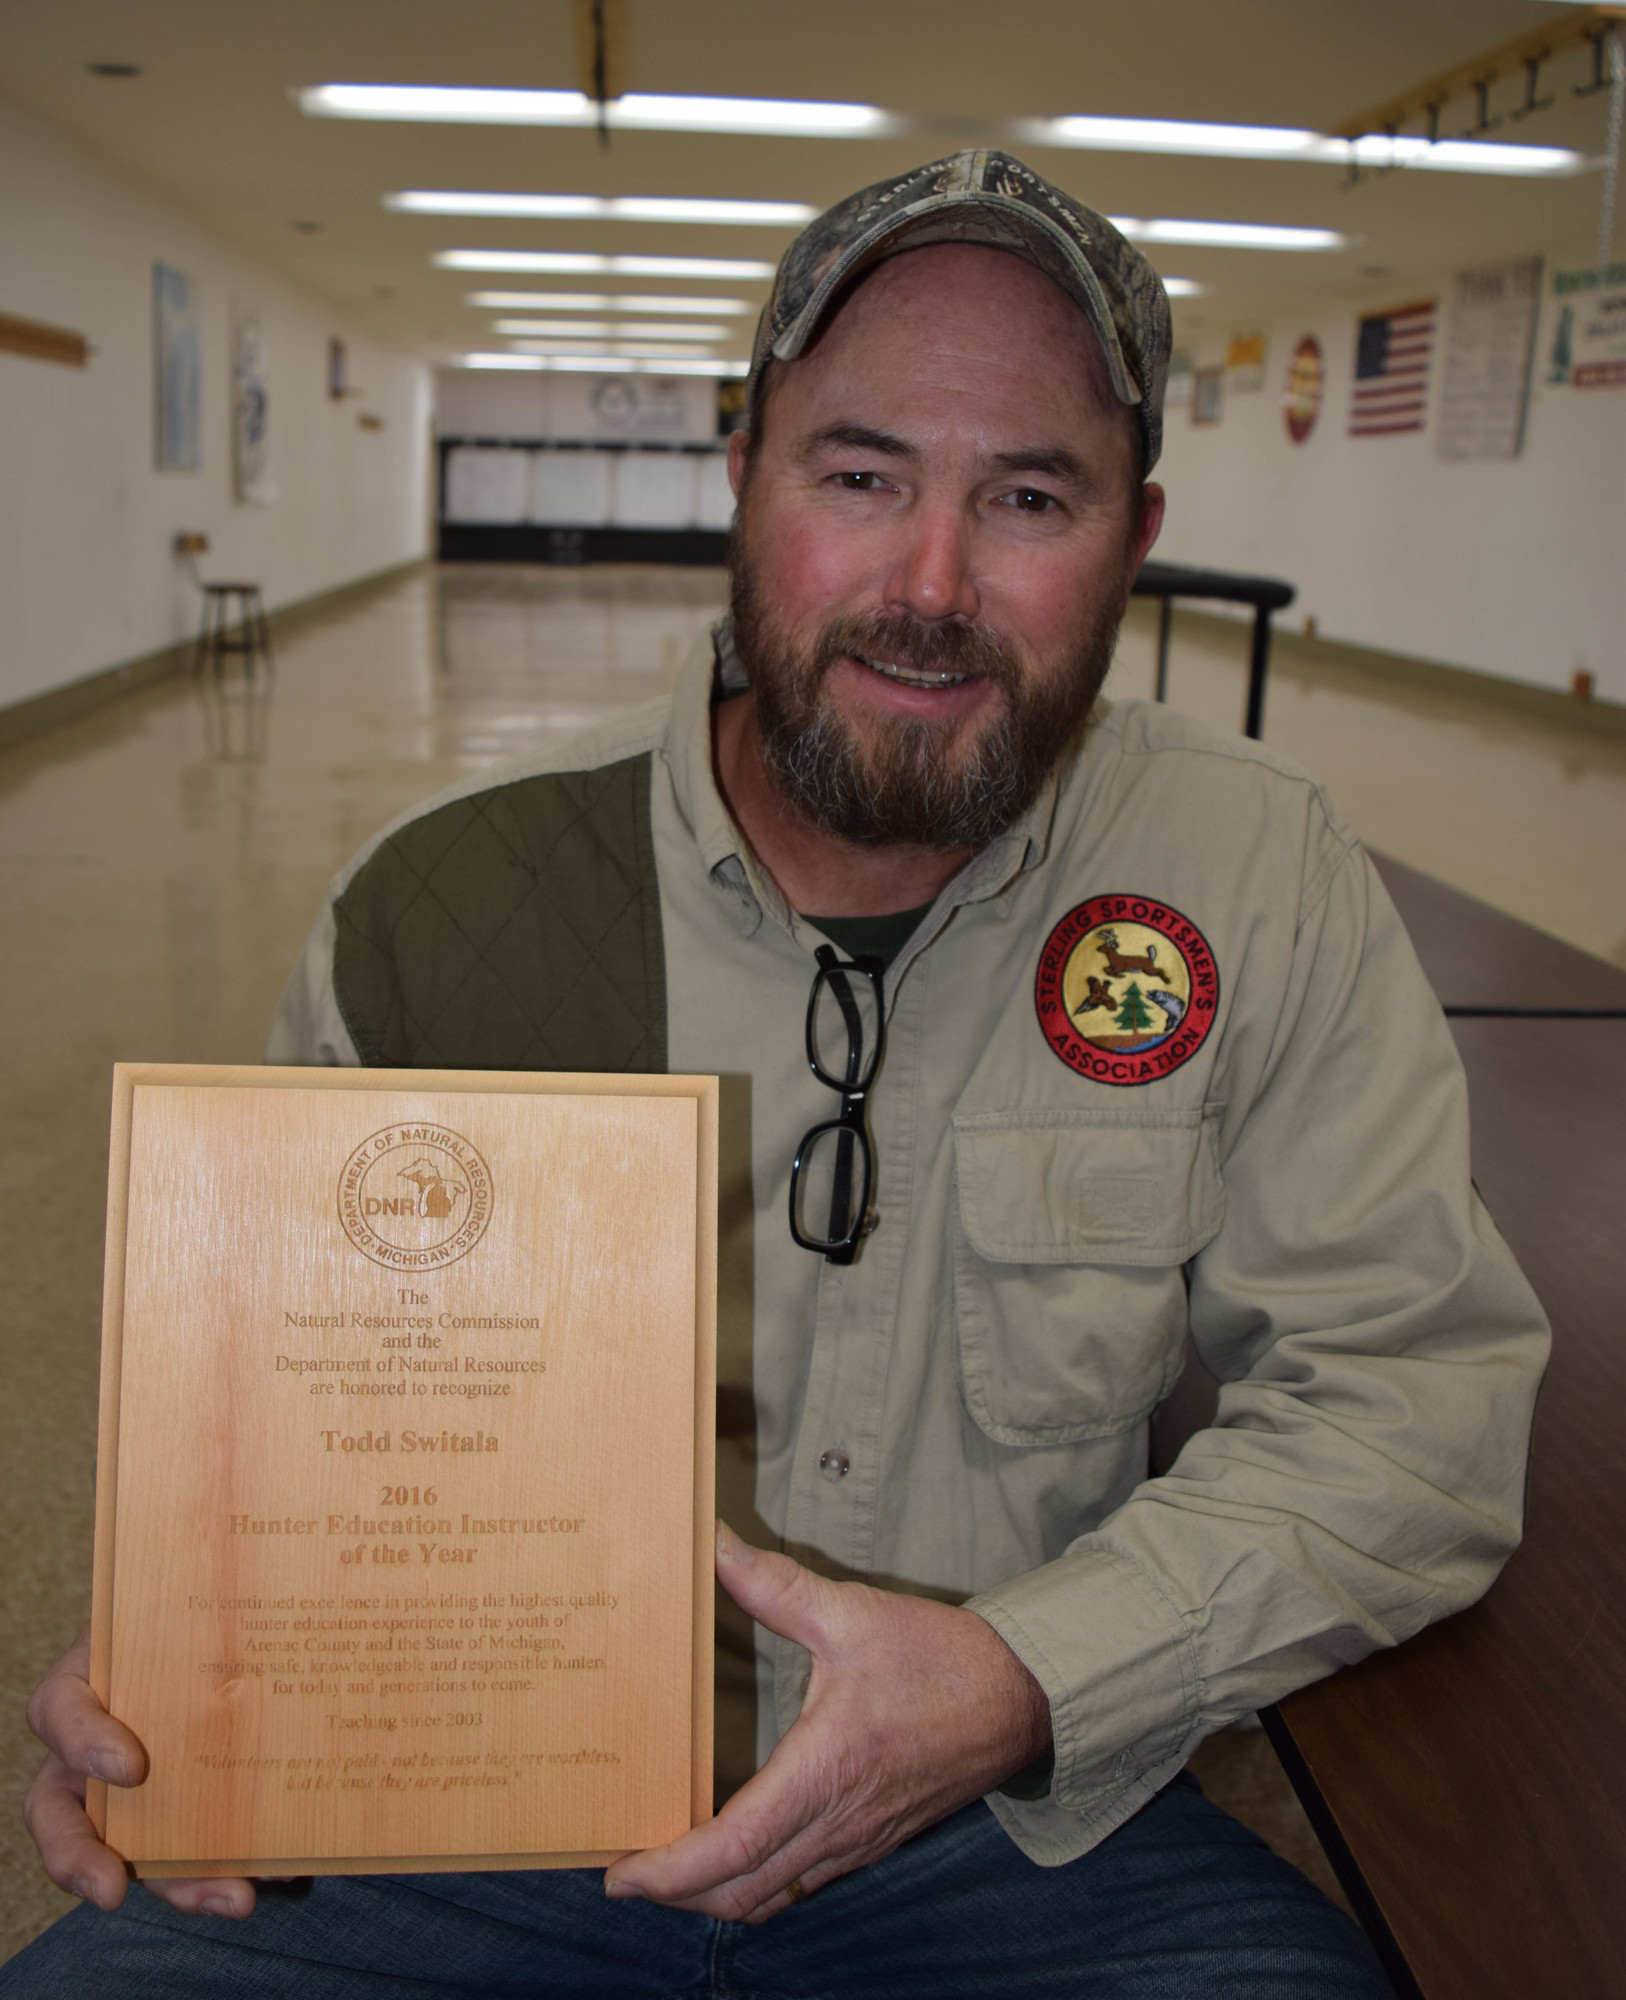 Todd Switala, 2016 Hunter Safety Instructor of the Year displays a plaque recognizing his service.